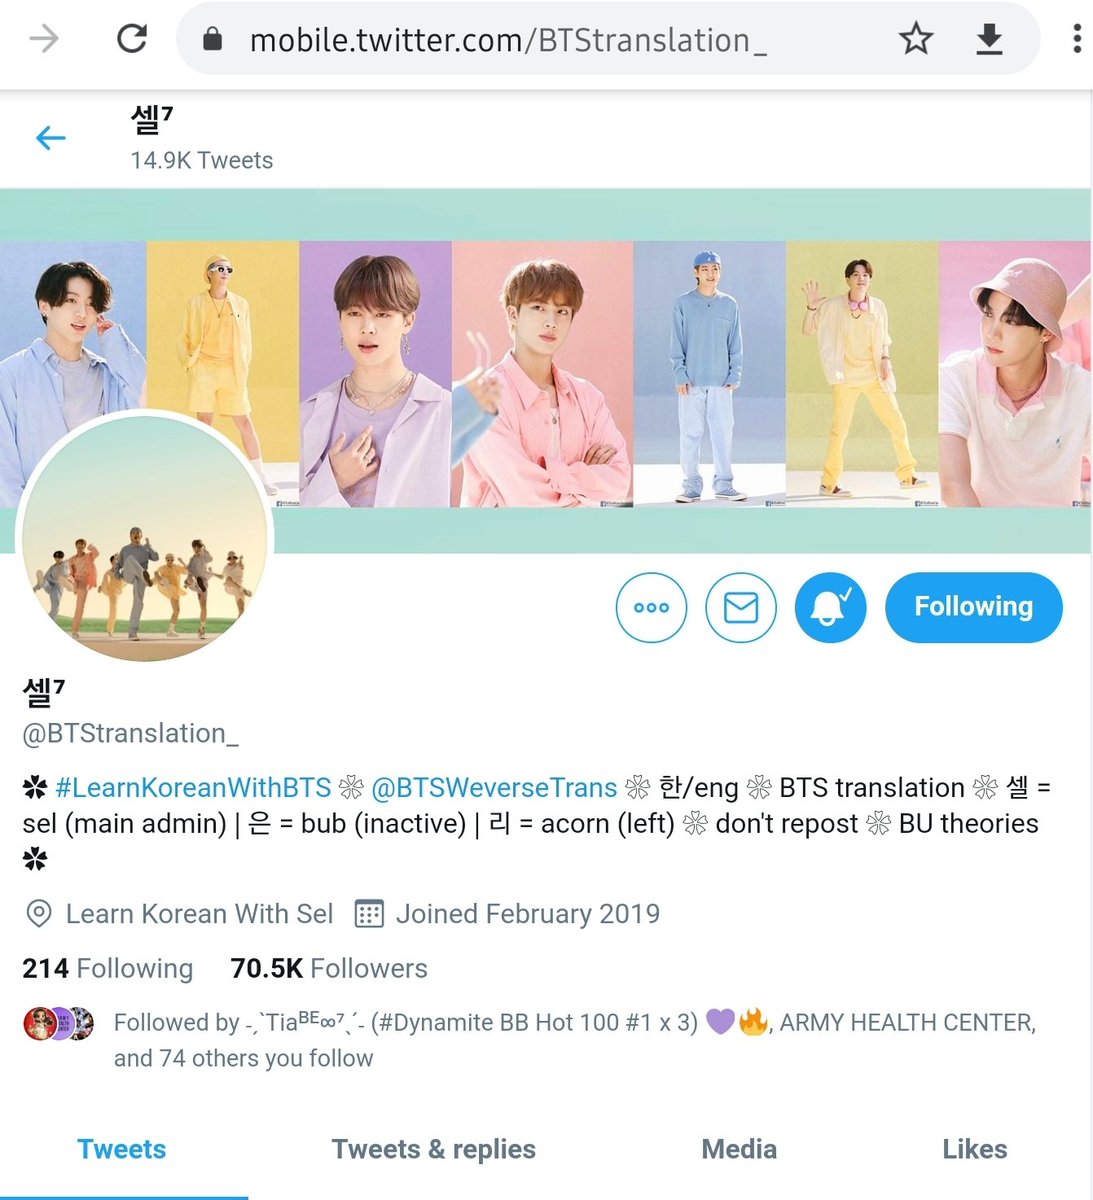 Graphic Design is your passion? -  @gvfxarmyNeed BTS Content Index? -  @index_btsNeed BTS Translation? -  @BTStranslation_  @doolsetbangtan*Disclaimer* There are many Translators here. You can pick. But always remember to be respectful to their FREE services!   #BTSARMY  @BTS_twt